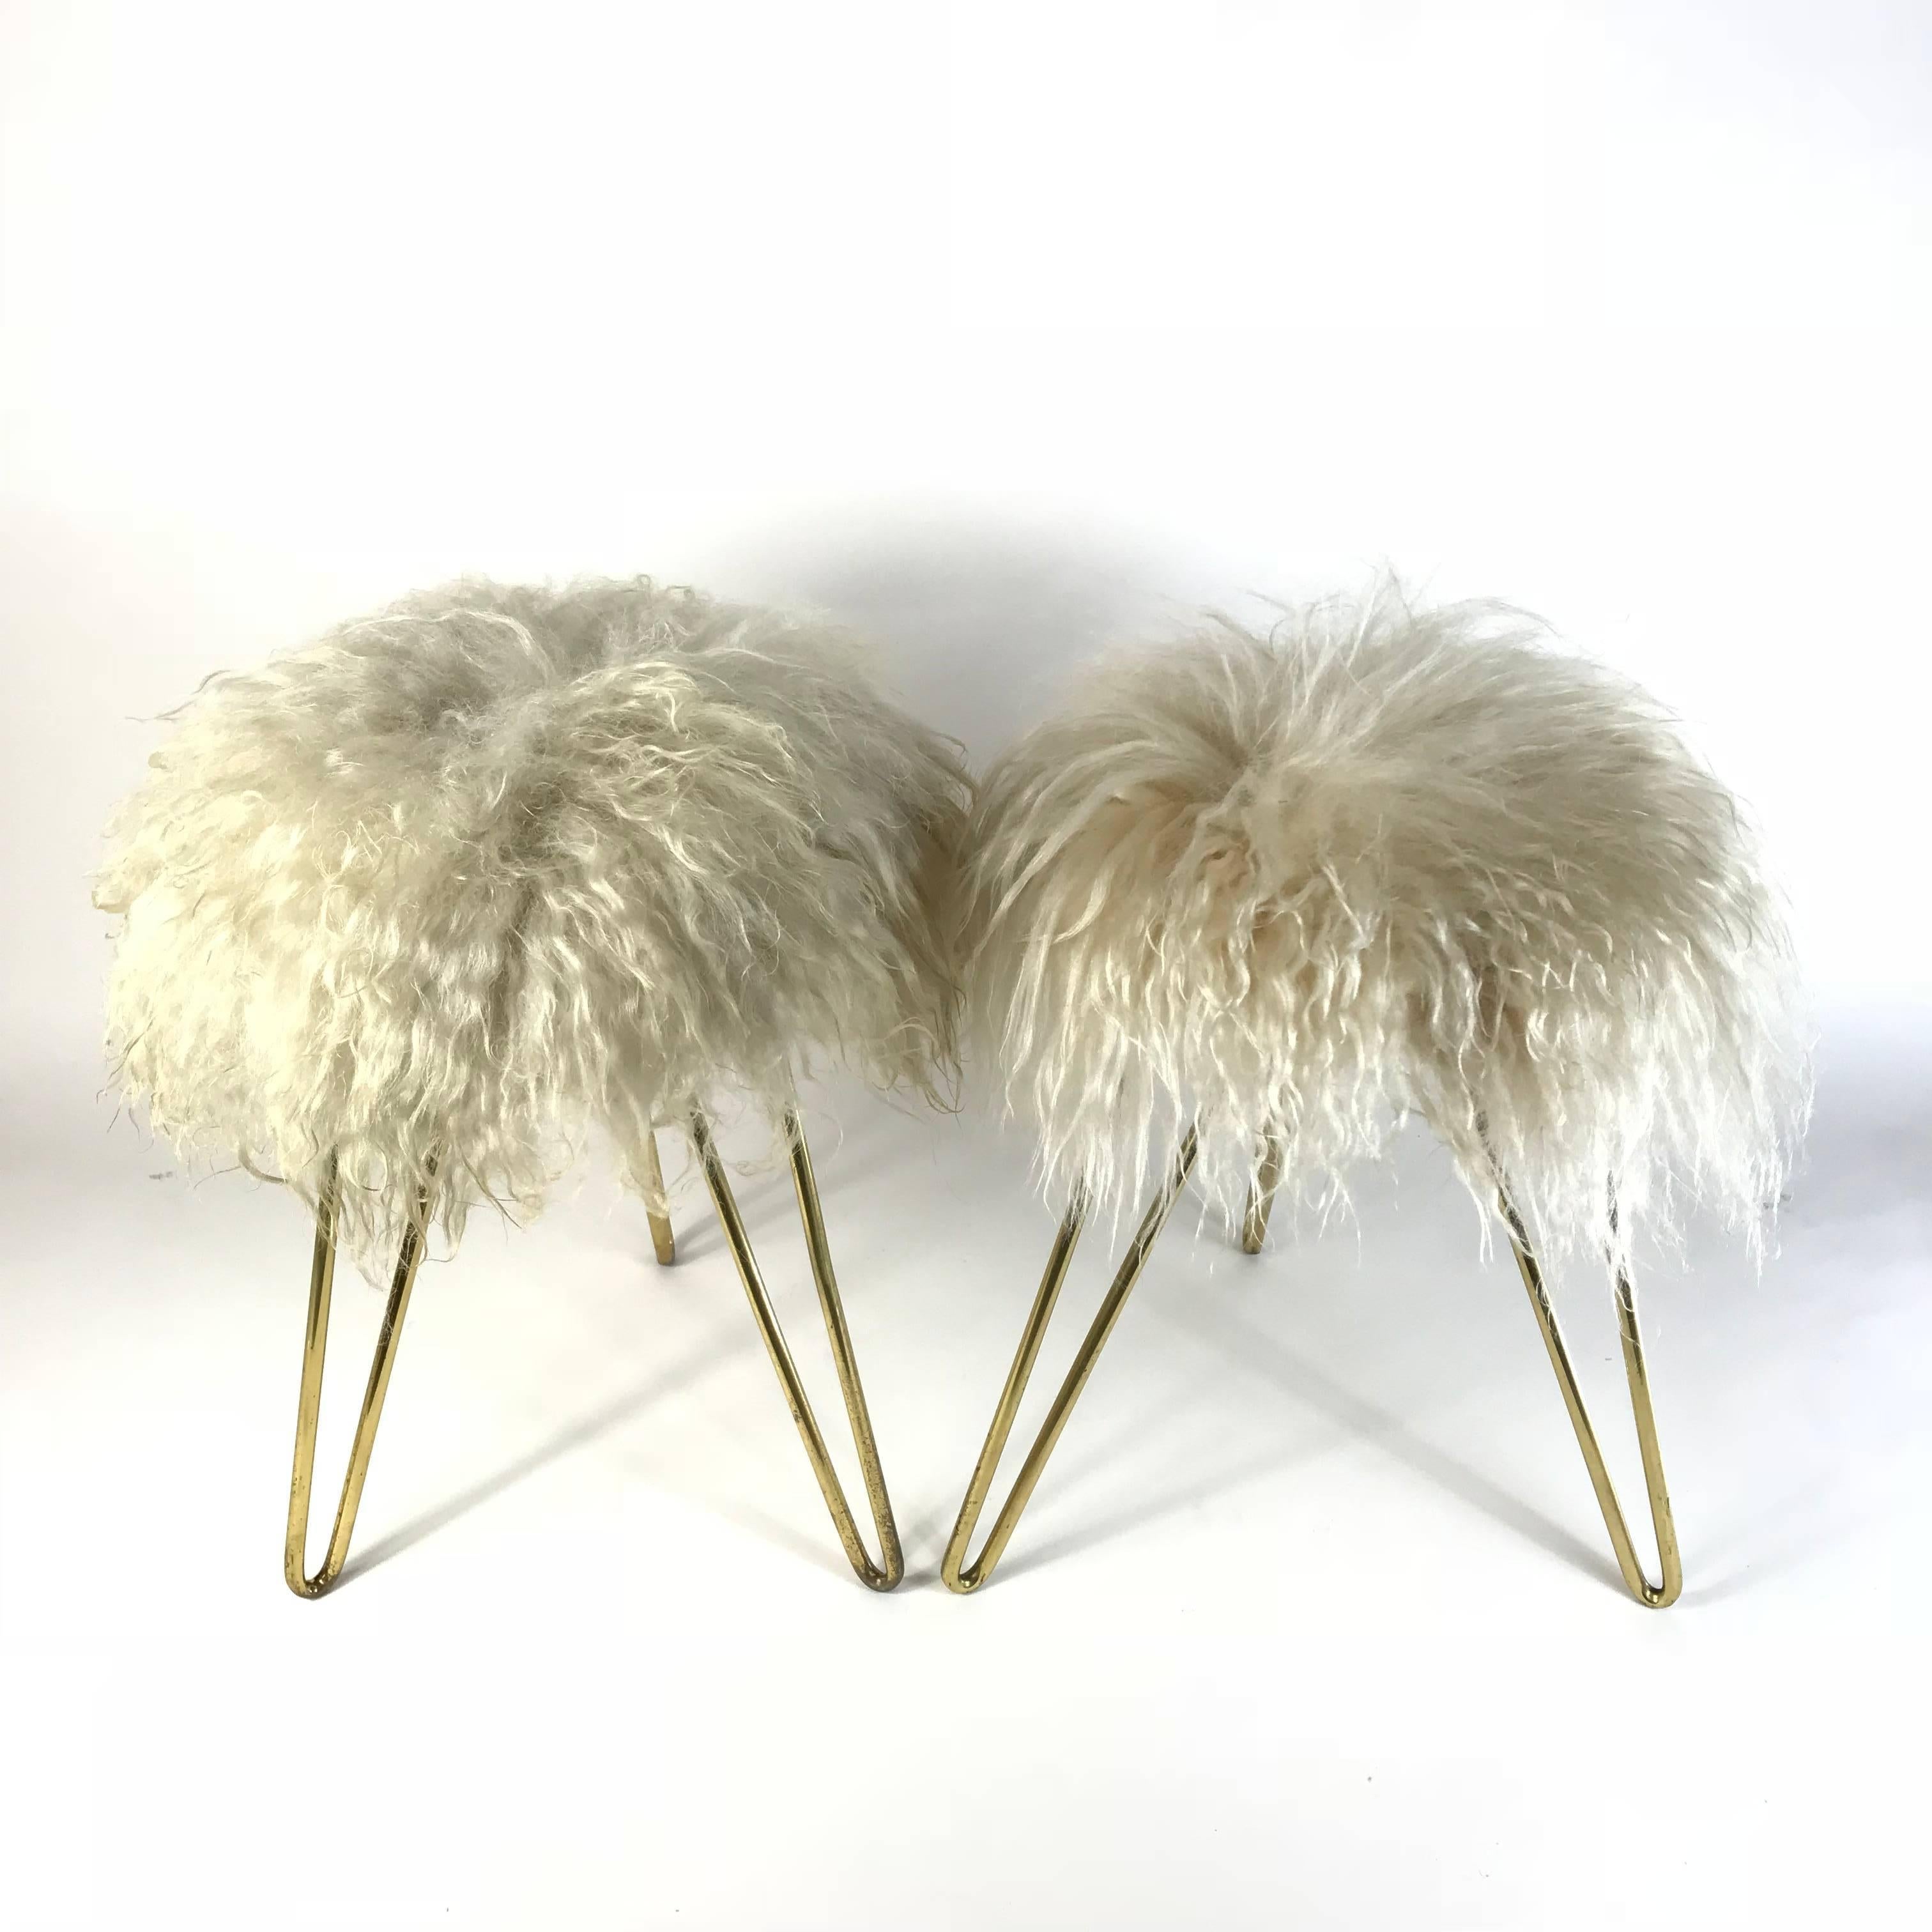 Pair of very decorative handmade French 1950s lambswool fur stools in the style of Jean Royère. The long white lambswool fur was dyed beige to intensify the visual depth, and the three brass hairpin legs serve as a reduced, minimalist counterpart to